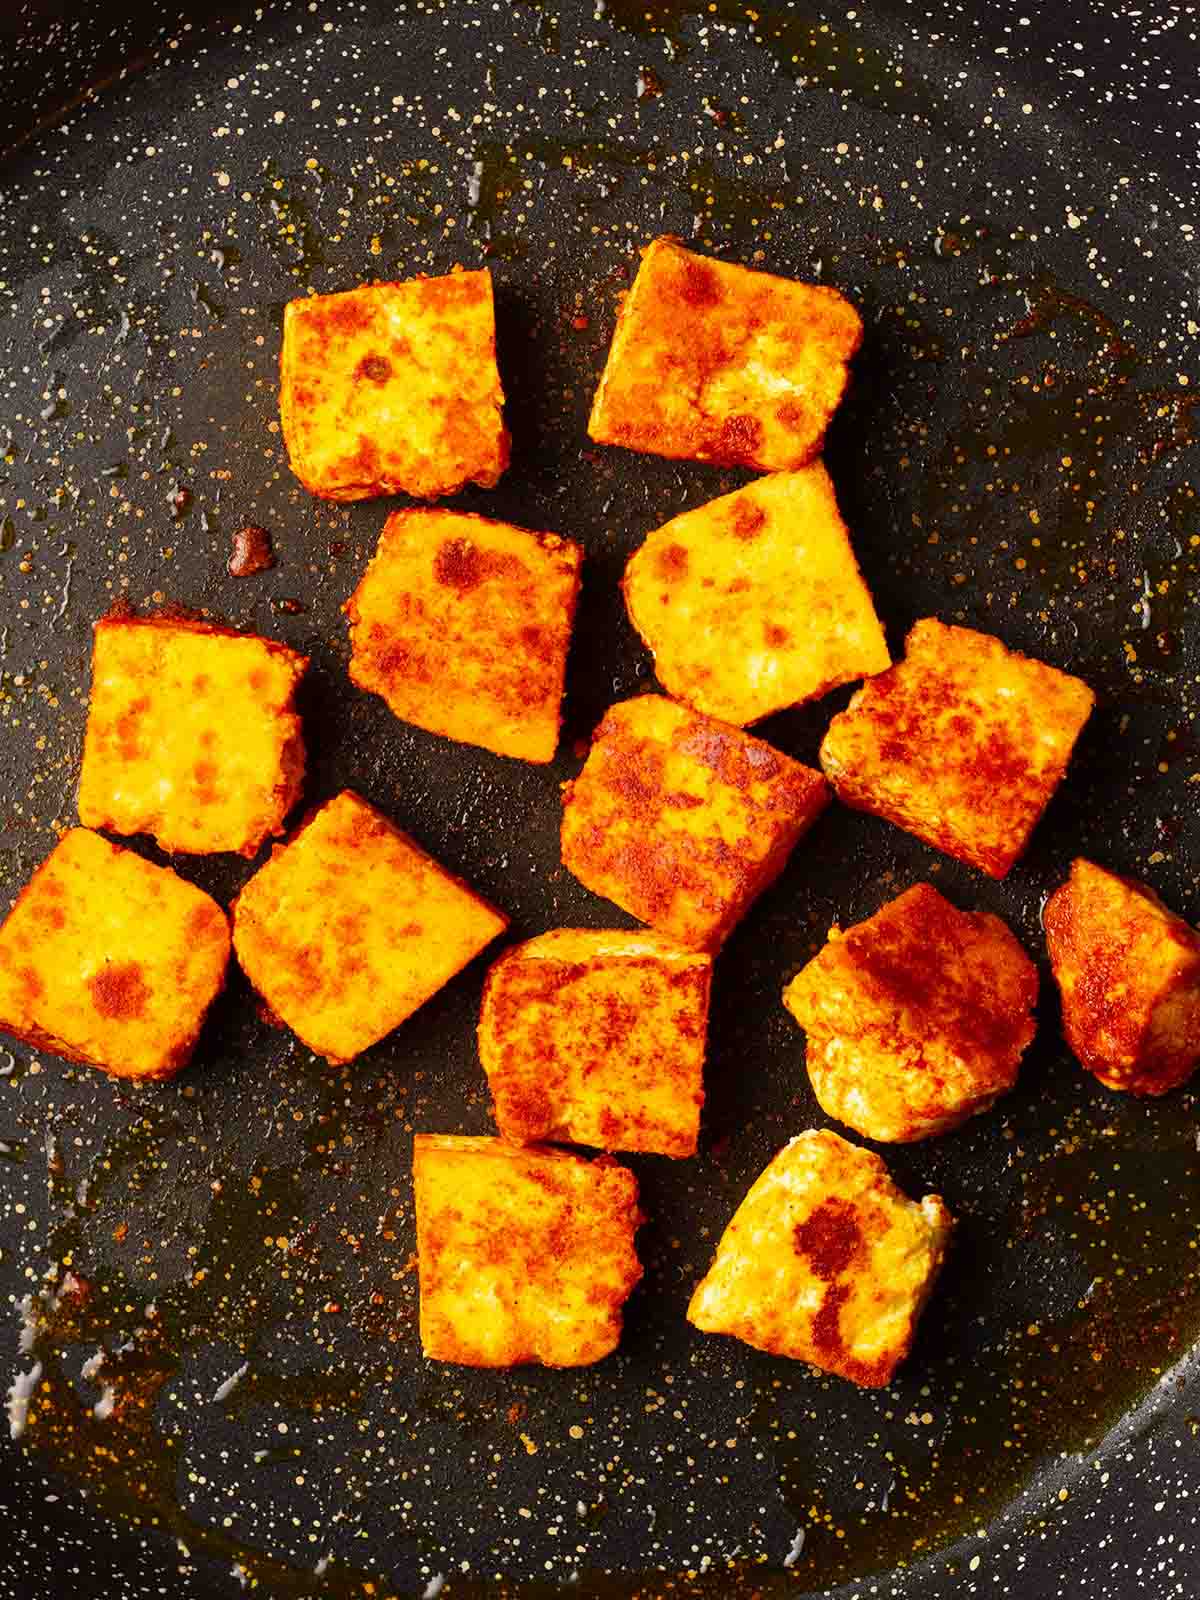 A close up of a frying pan with paneer being cooked, for step 1 in the process of cooking palak paneer.